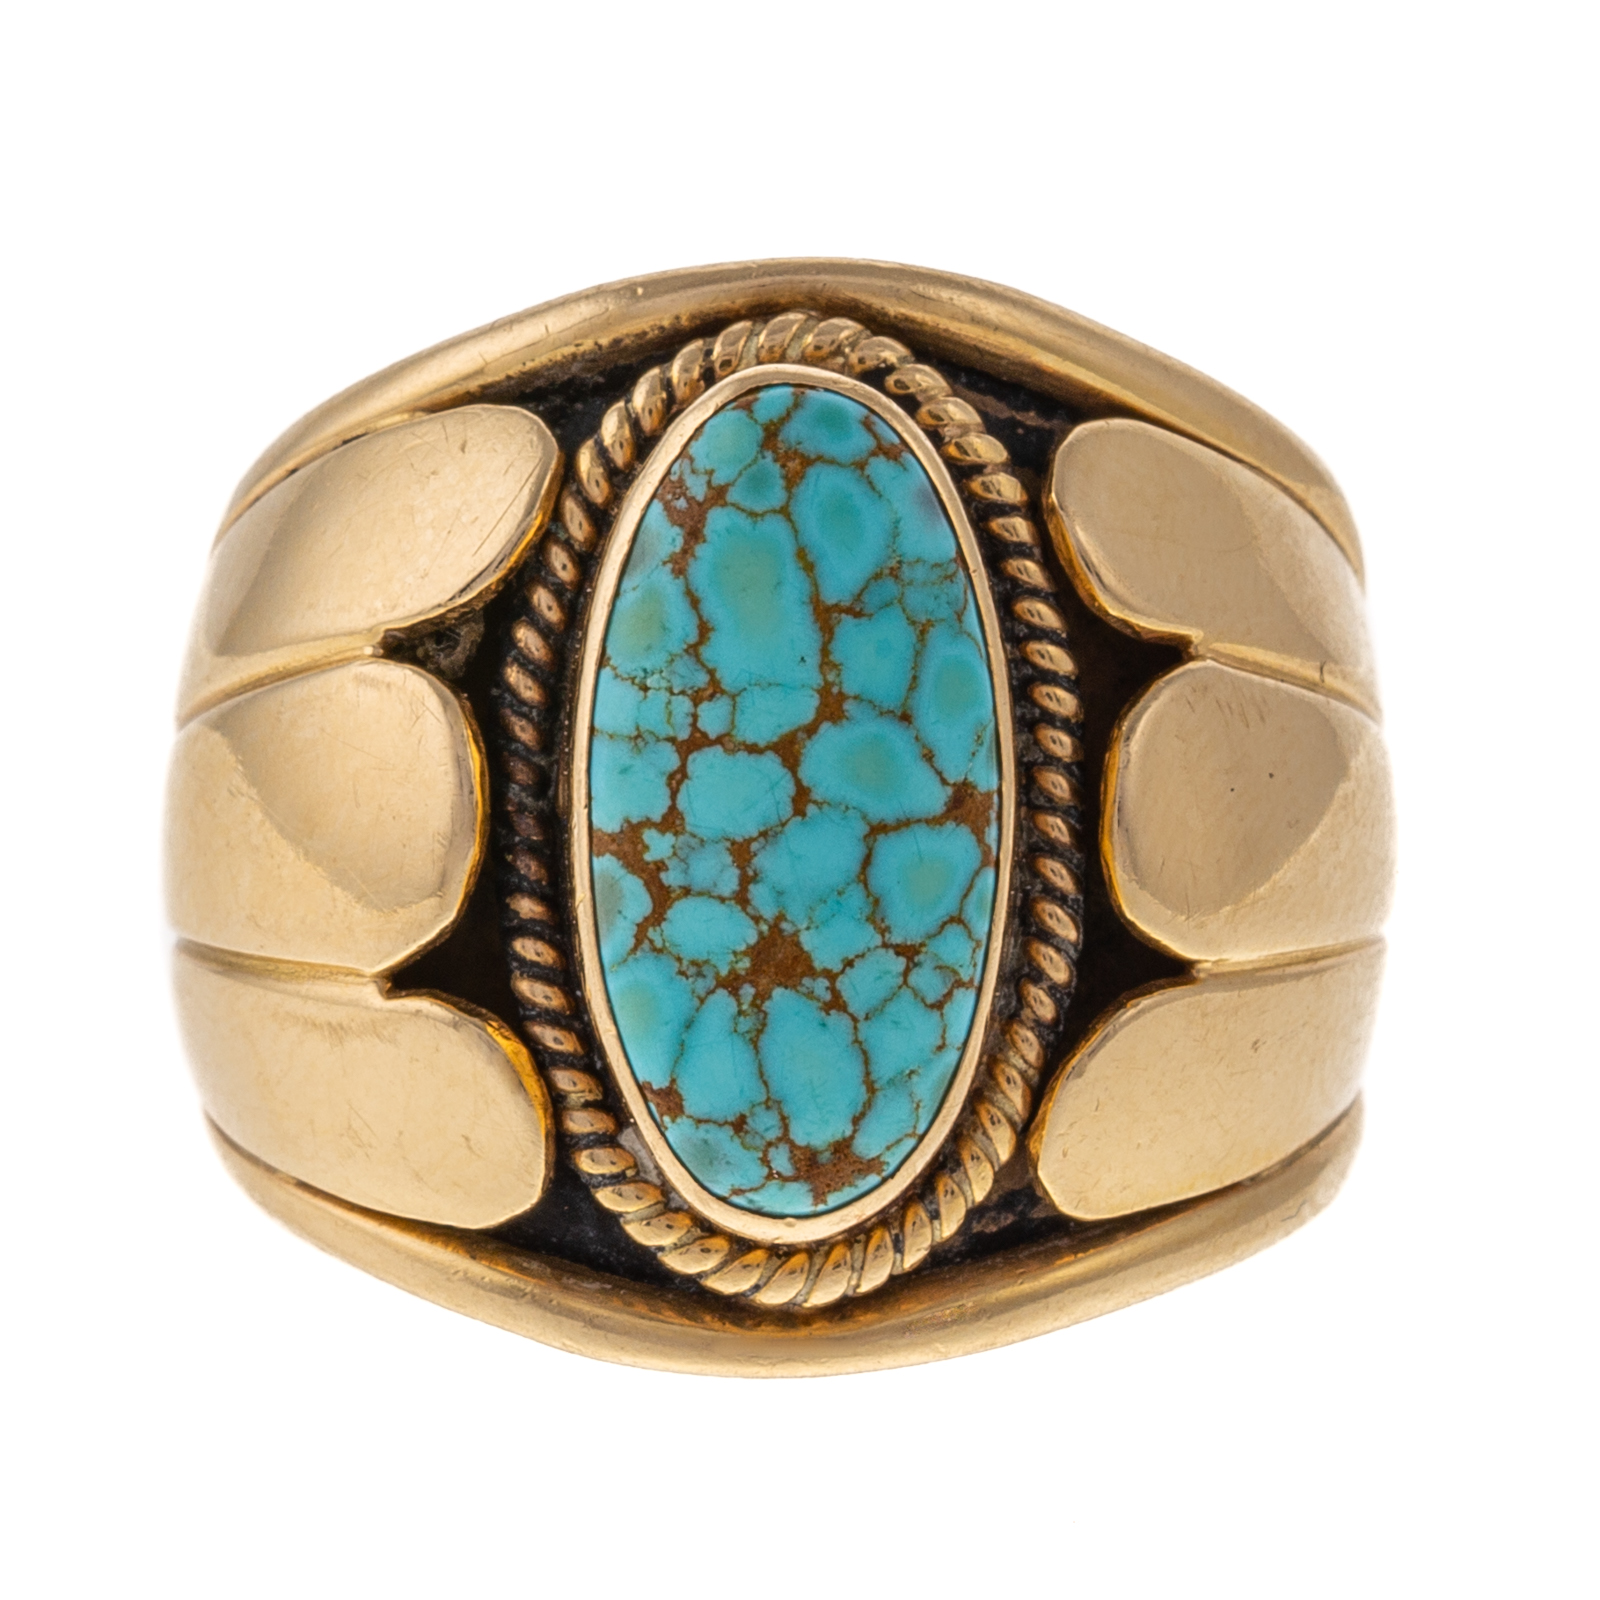 A RARE 14K NAVAJO TURQUOISE RING